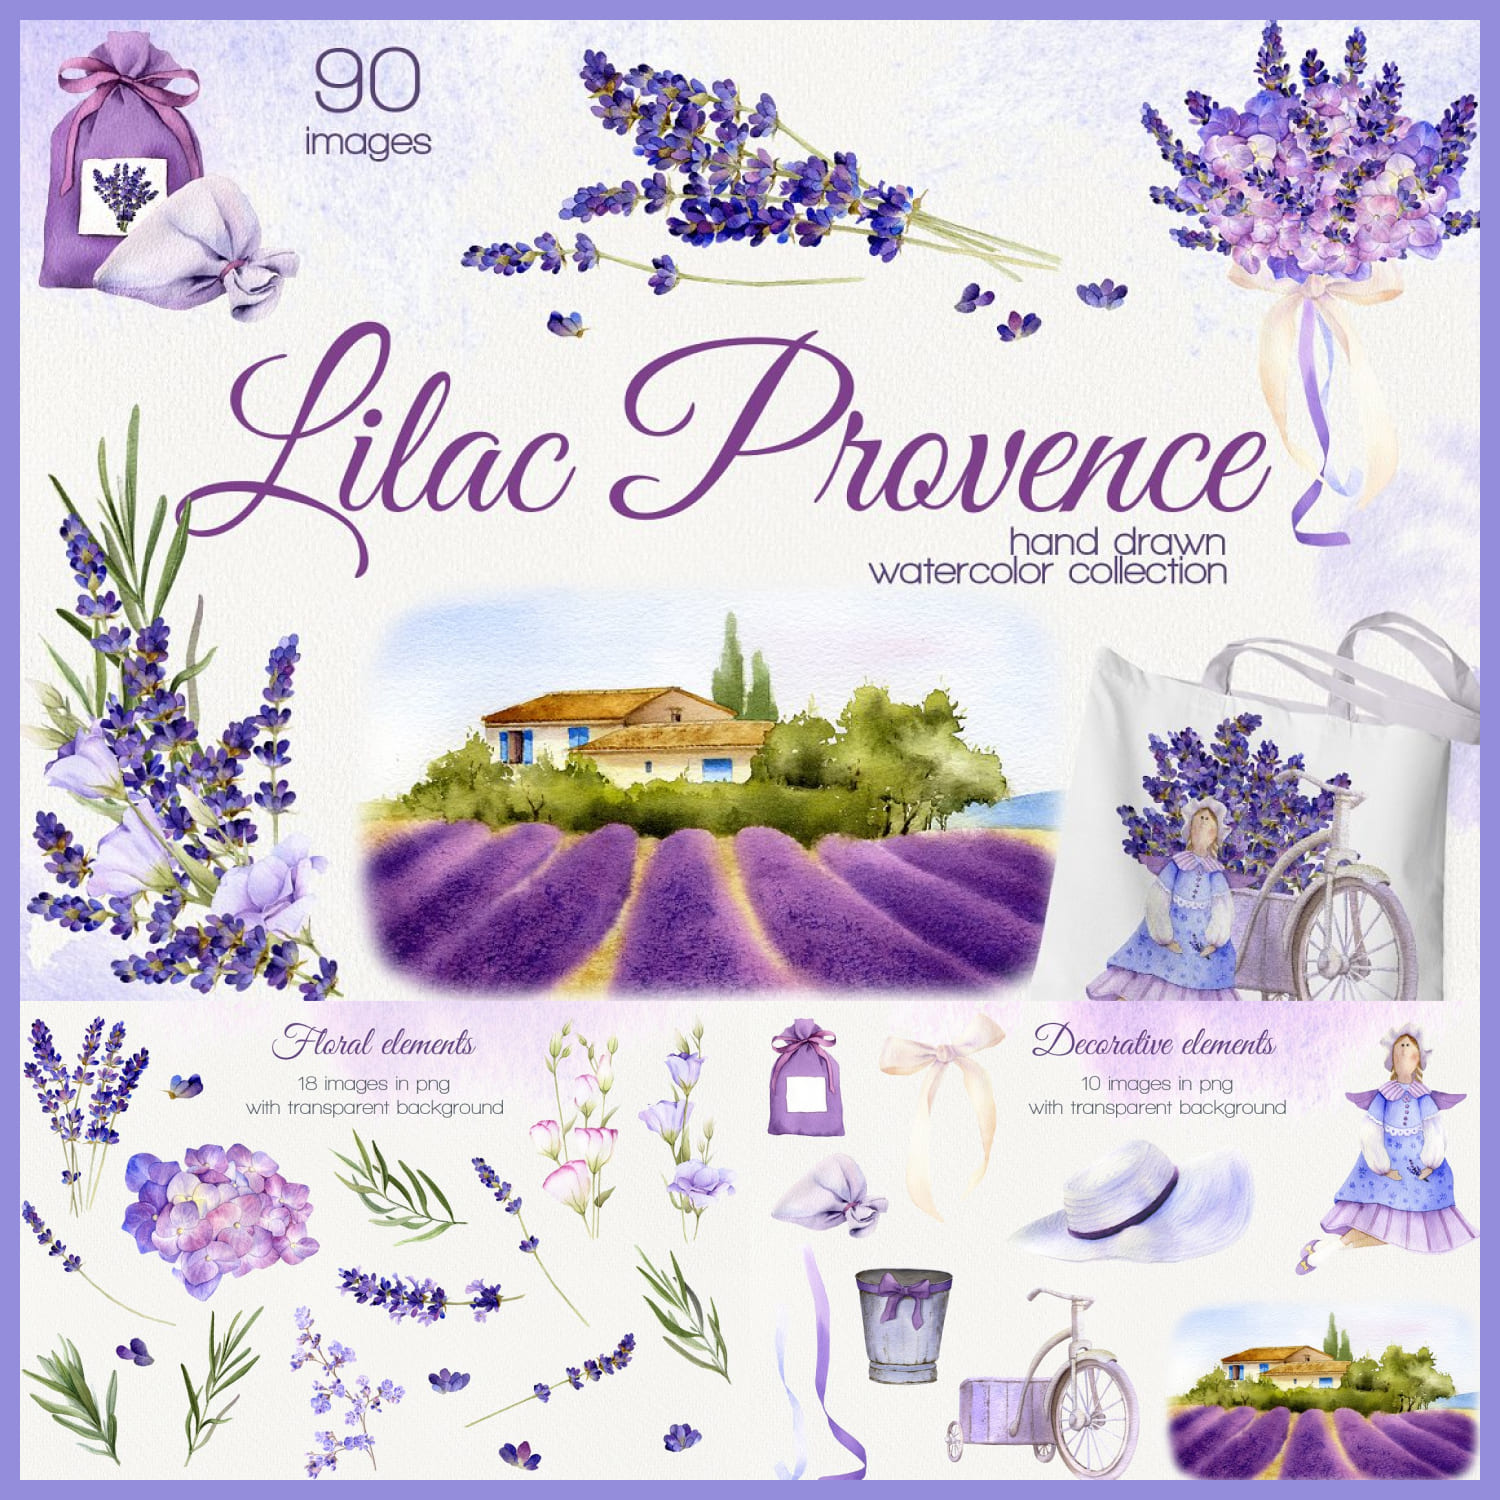 Lilac Provence Watercolor Collection cover image.